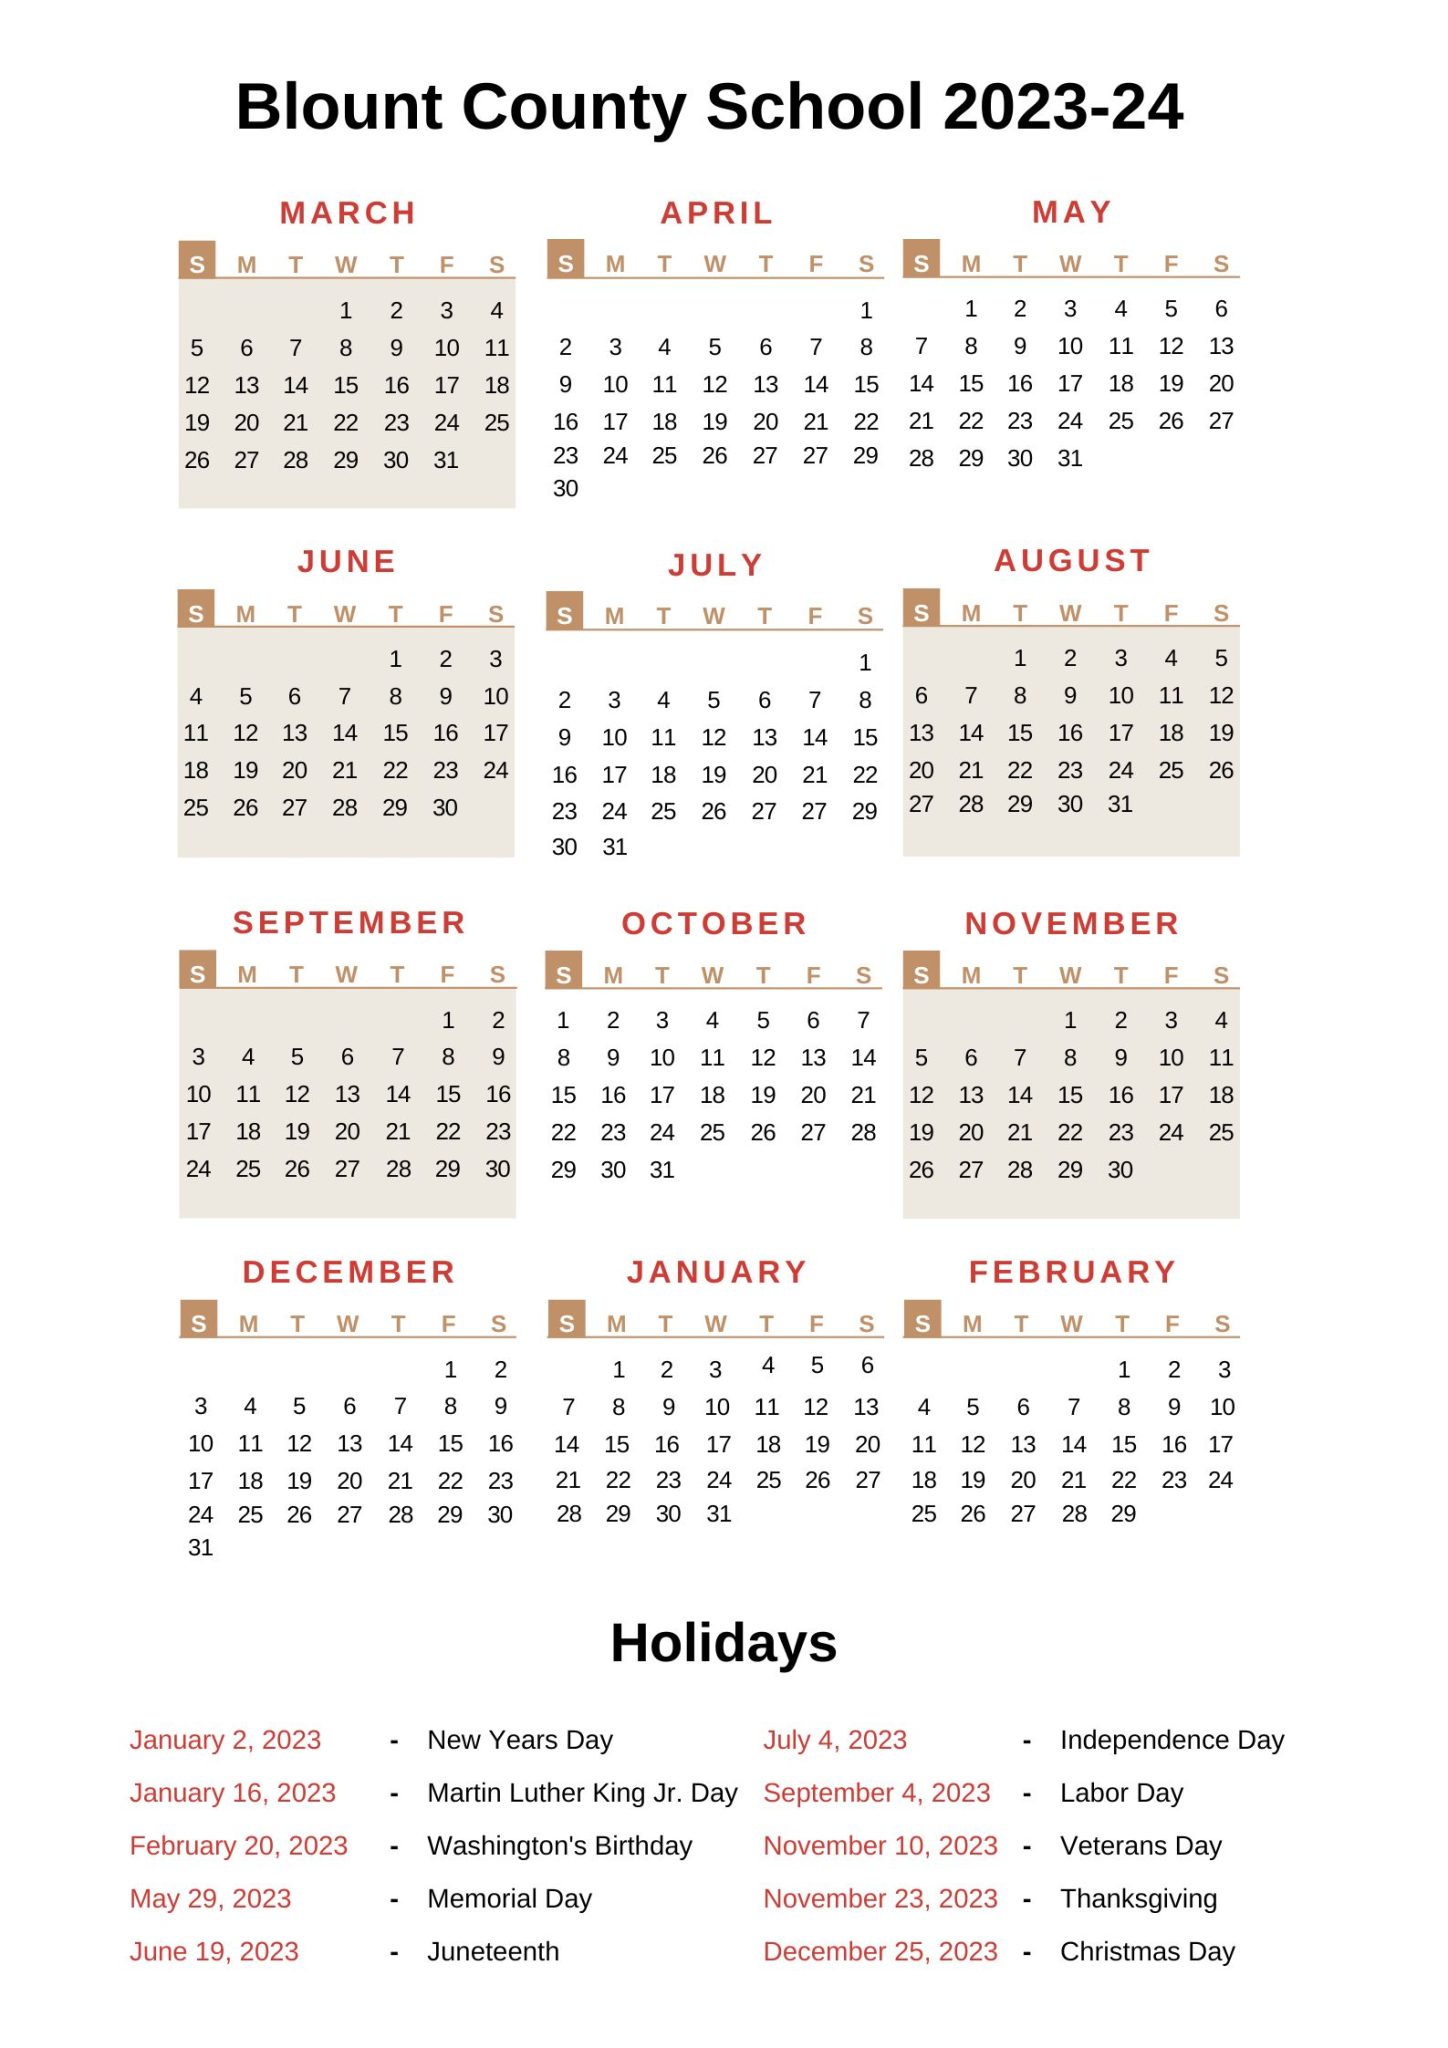 Blount County Schools Calendar 202324 with Holidays